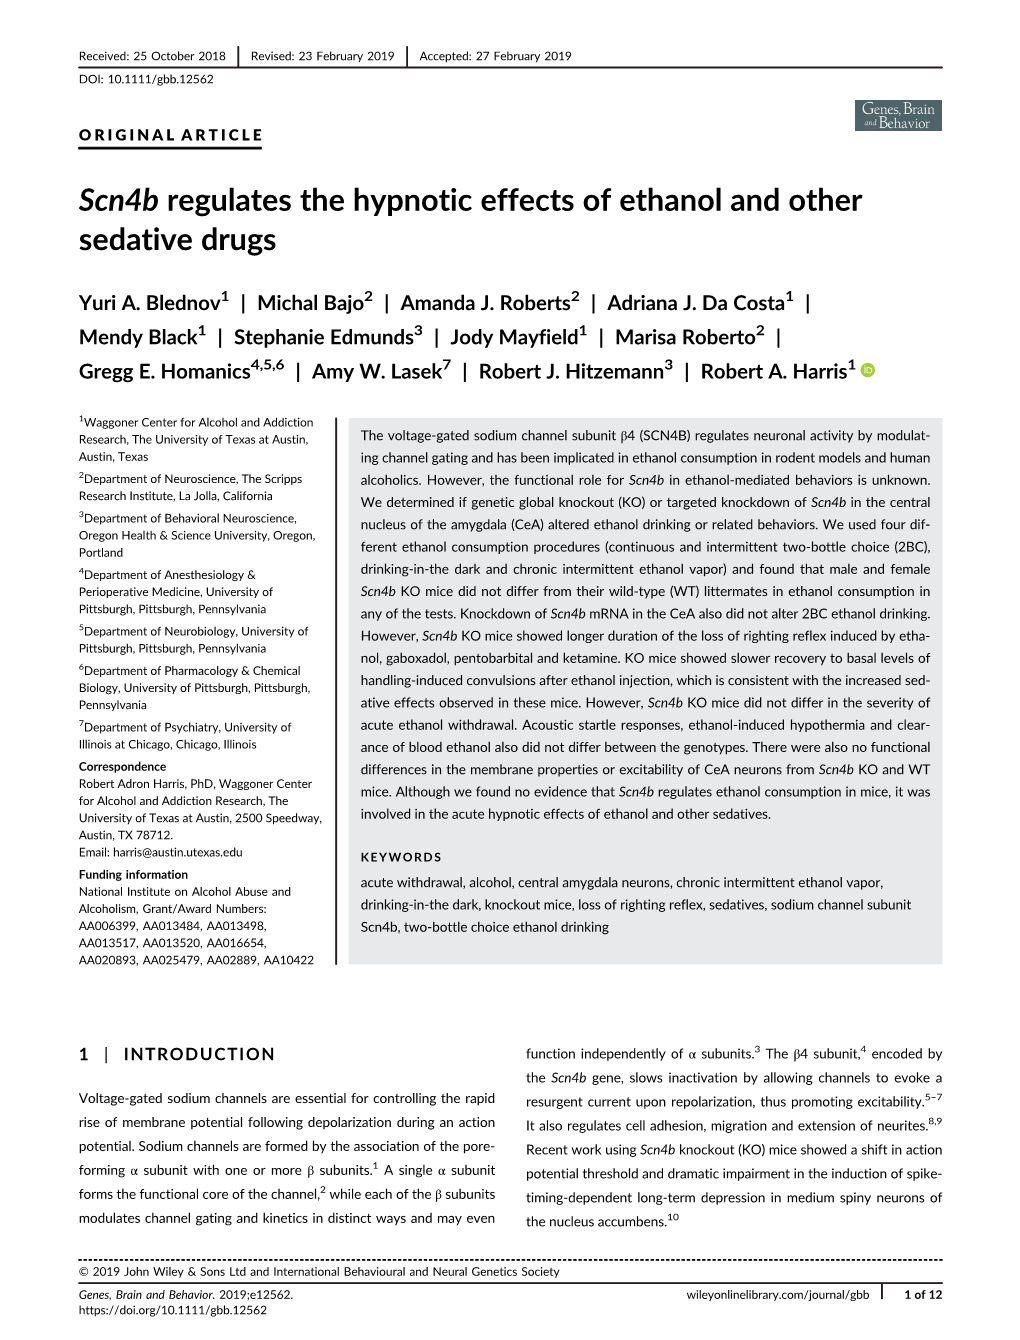 Scn4b Regulates the Hypnotic Effects of Ethanol and Other Sedative Drugs